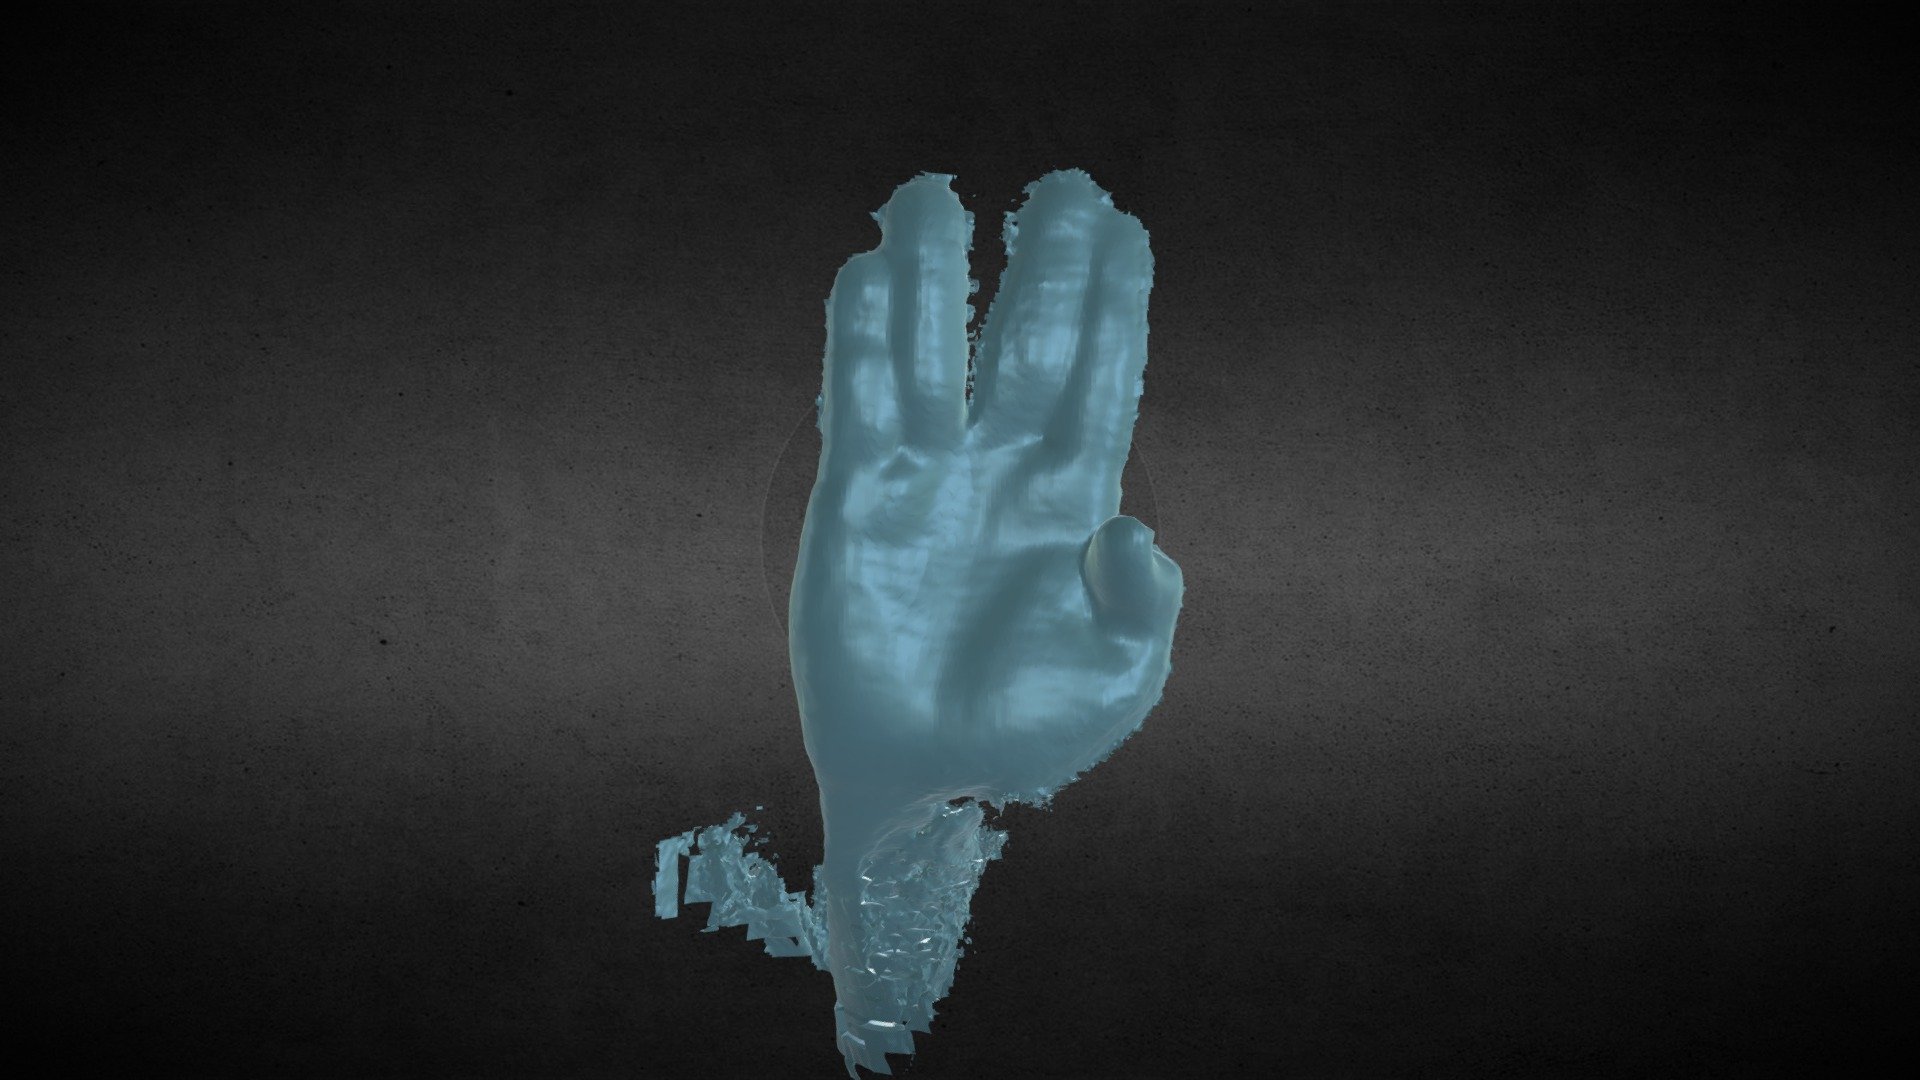 Live Long and Prosper (Quick scan)